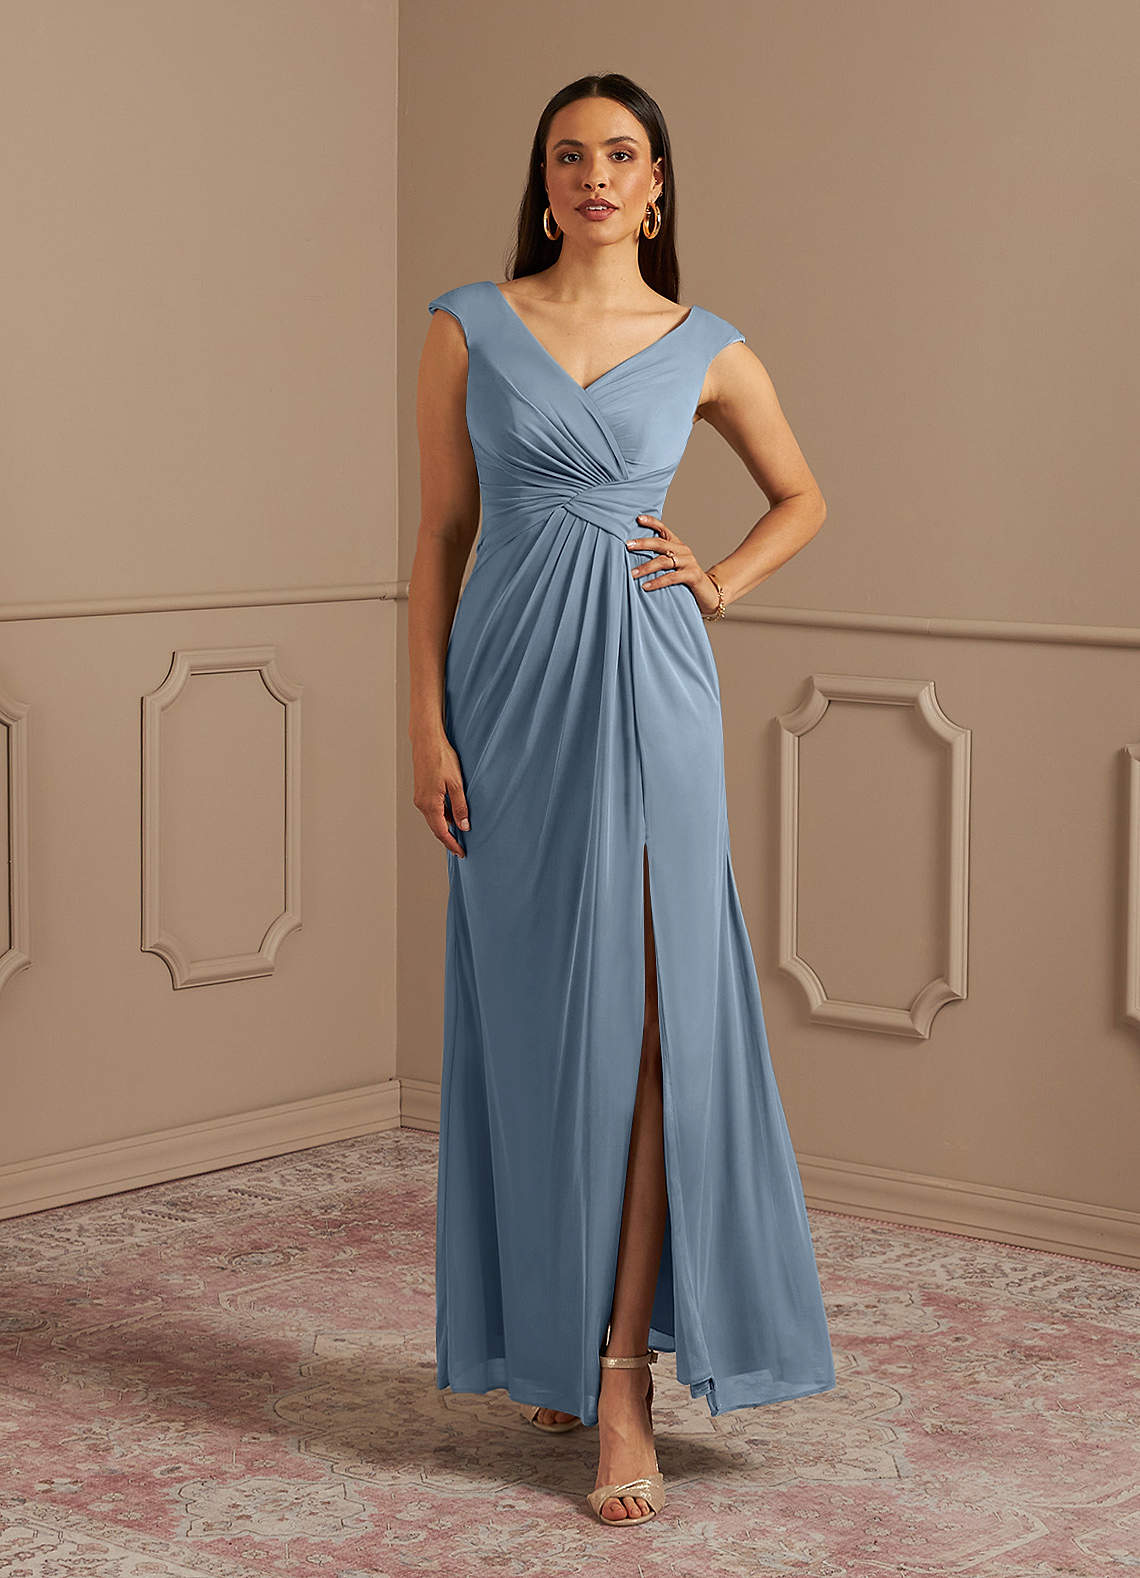 Azazie Andi Mother of the Bride Dresses A-Line Pleated Mesh Floor-Length Dress image1